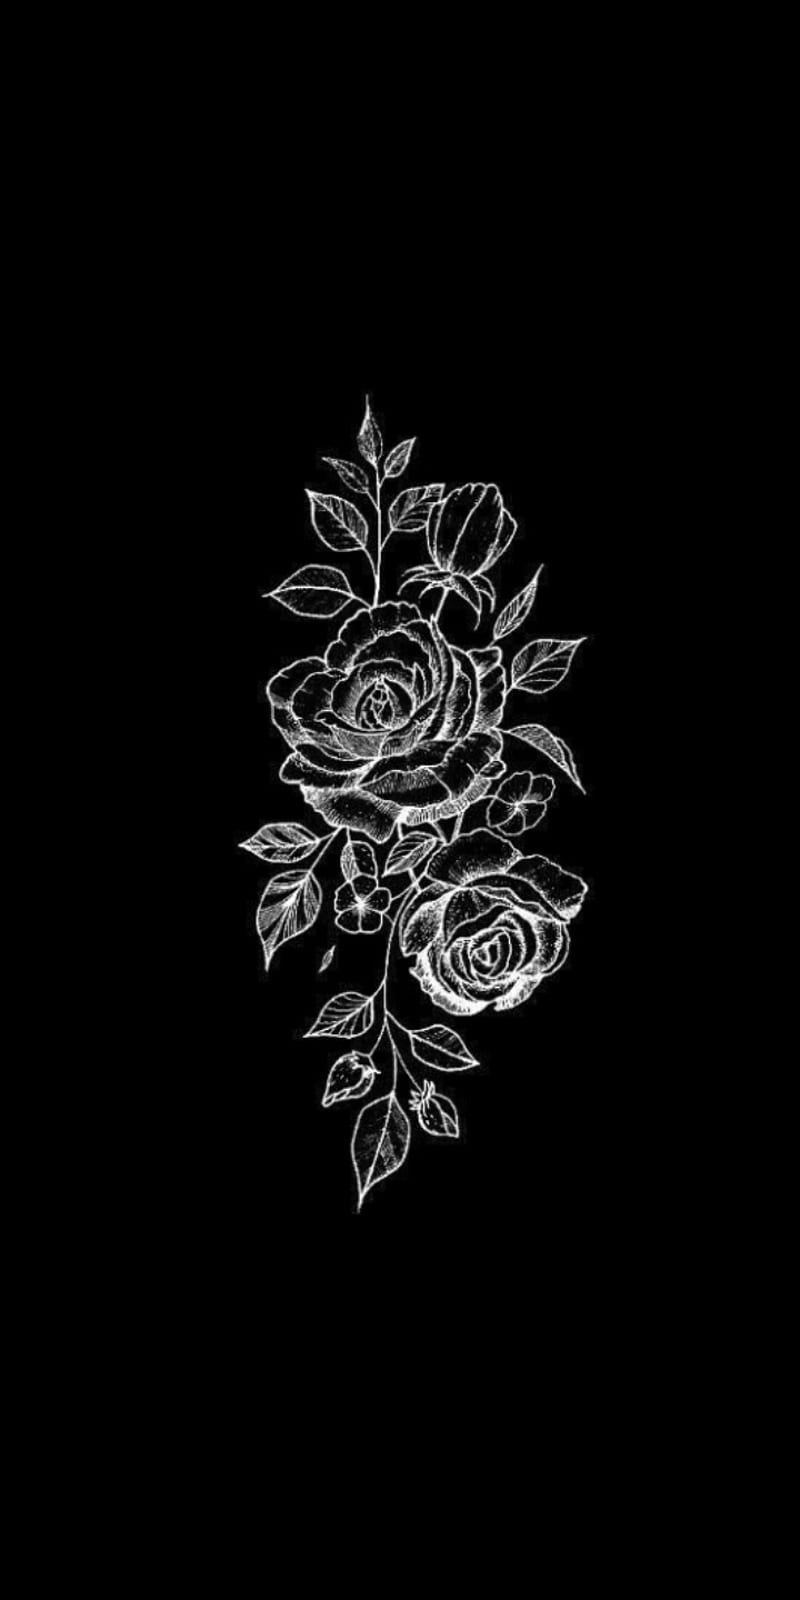 Black and white roses wallpaper for your phone - Black, roses, black rose, black and white, modern